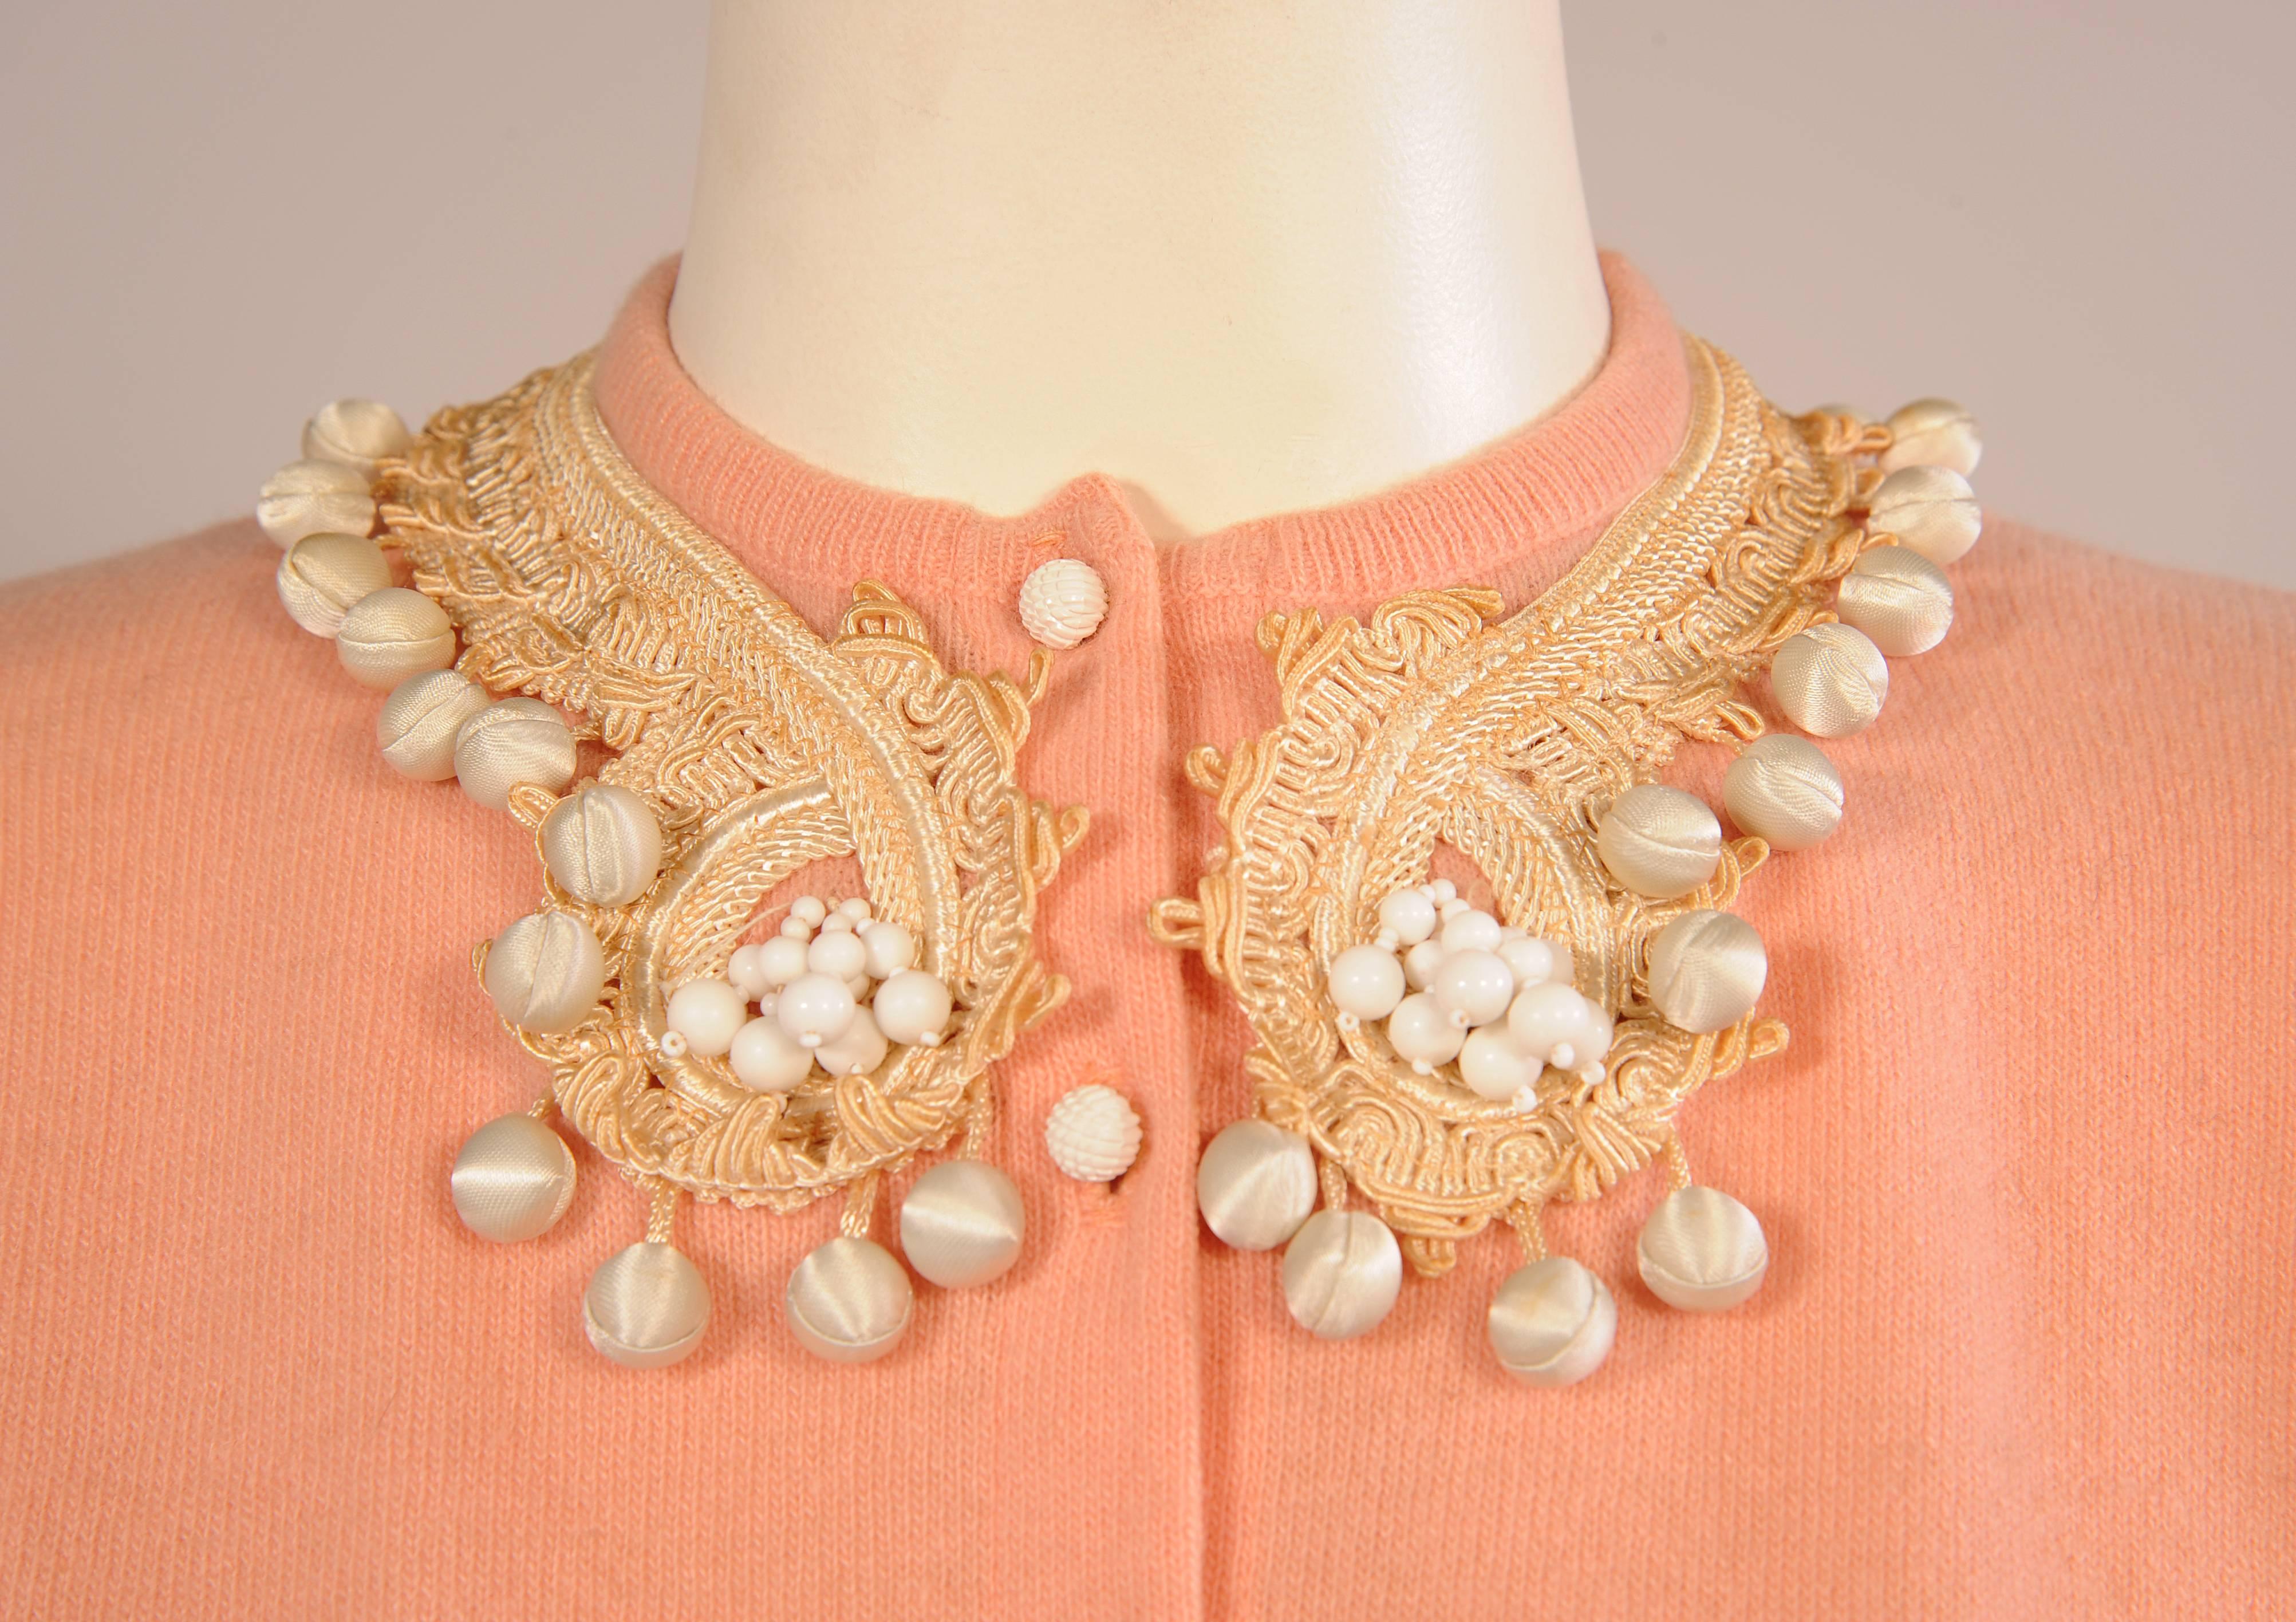 This sweet 1950's cashmere sweater is embellished with braid trim at the neckline and cuffs. A large cluster of white beads, en tremblant, is set into the turn of the collar trim. This is further enhanced with dangling white satin covered balls on